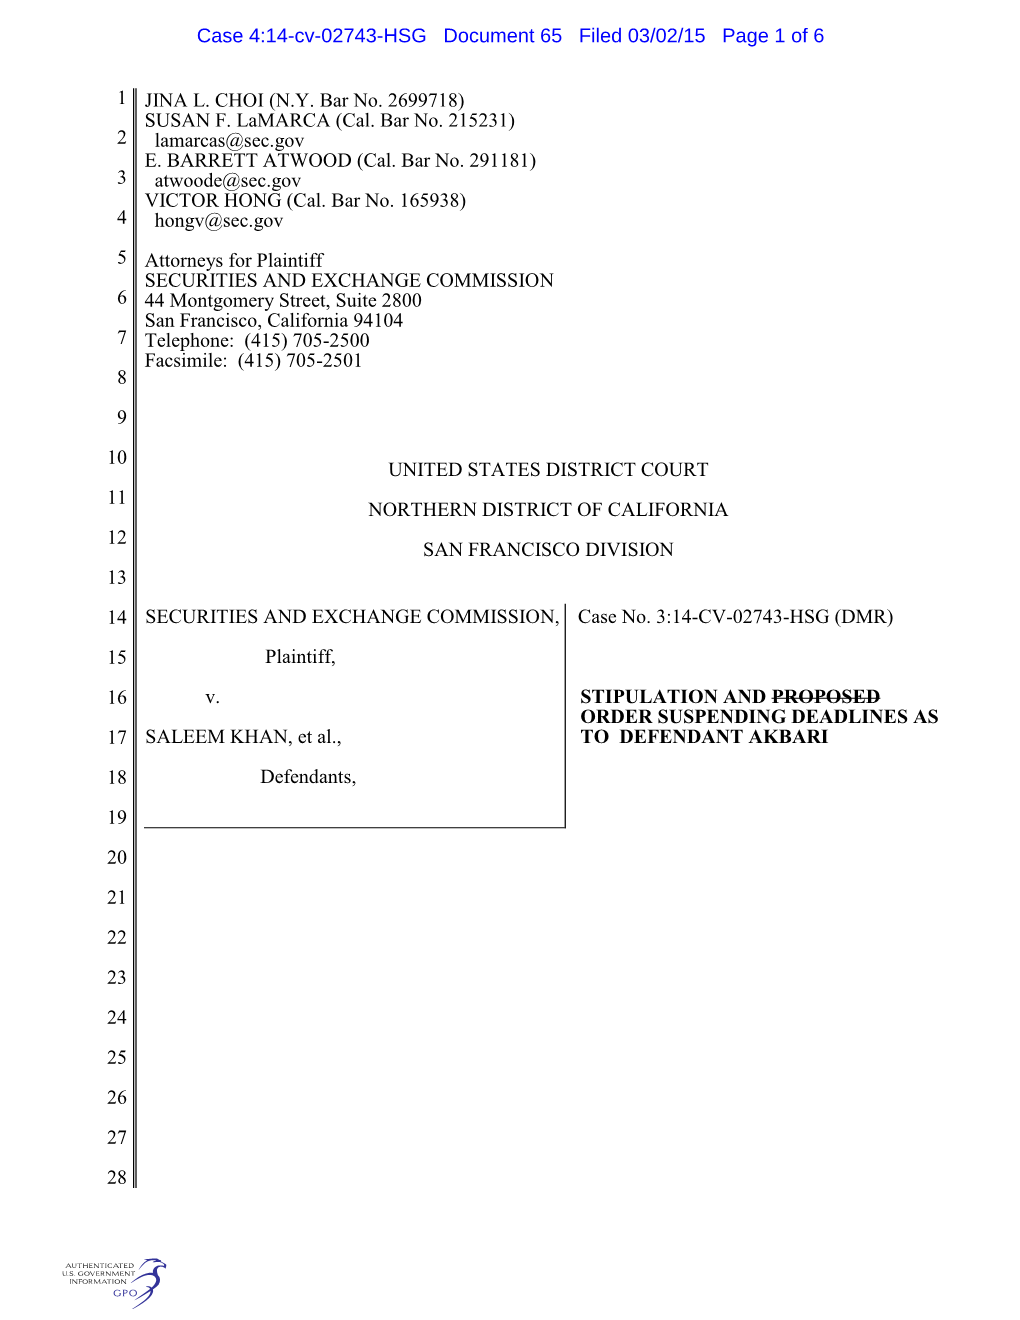 Case 4:14-Cv-02743-HSG Document 65 Filed 03/02/15 Page 1 of 6